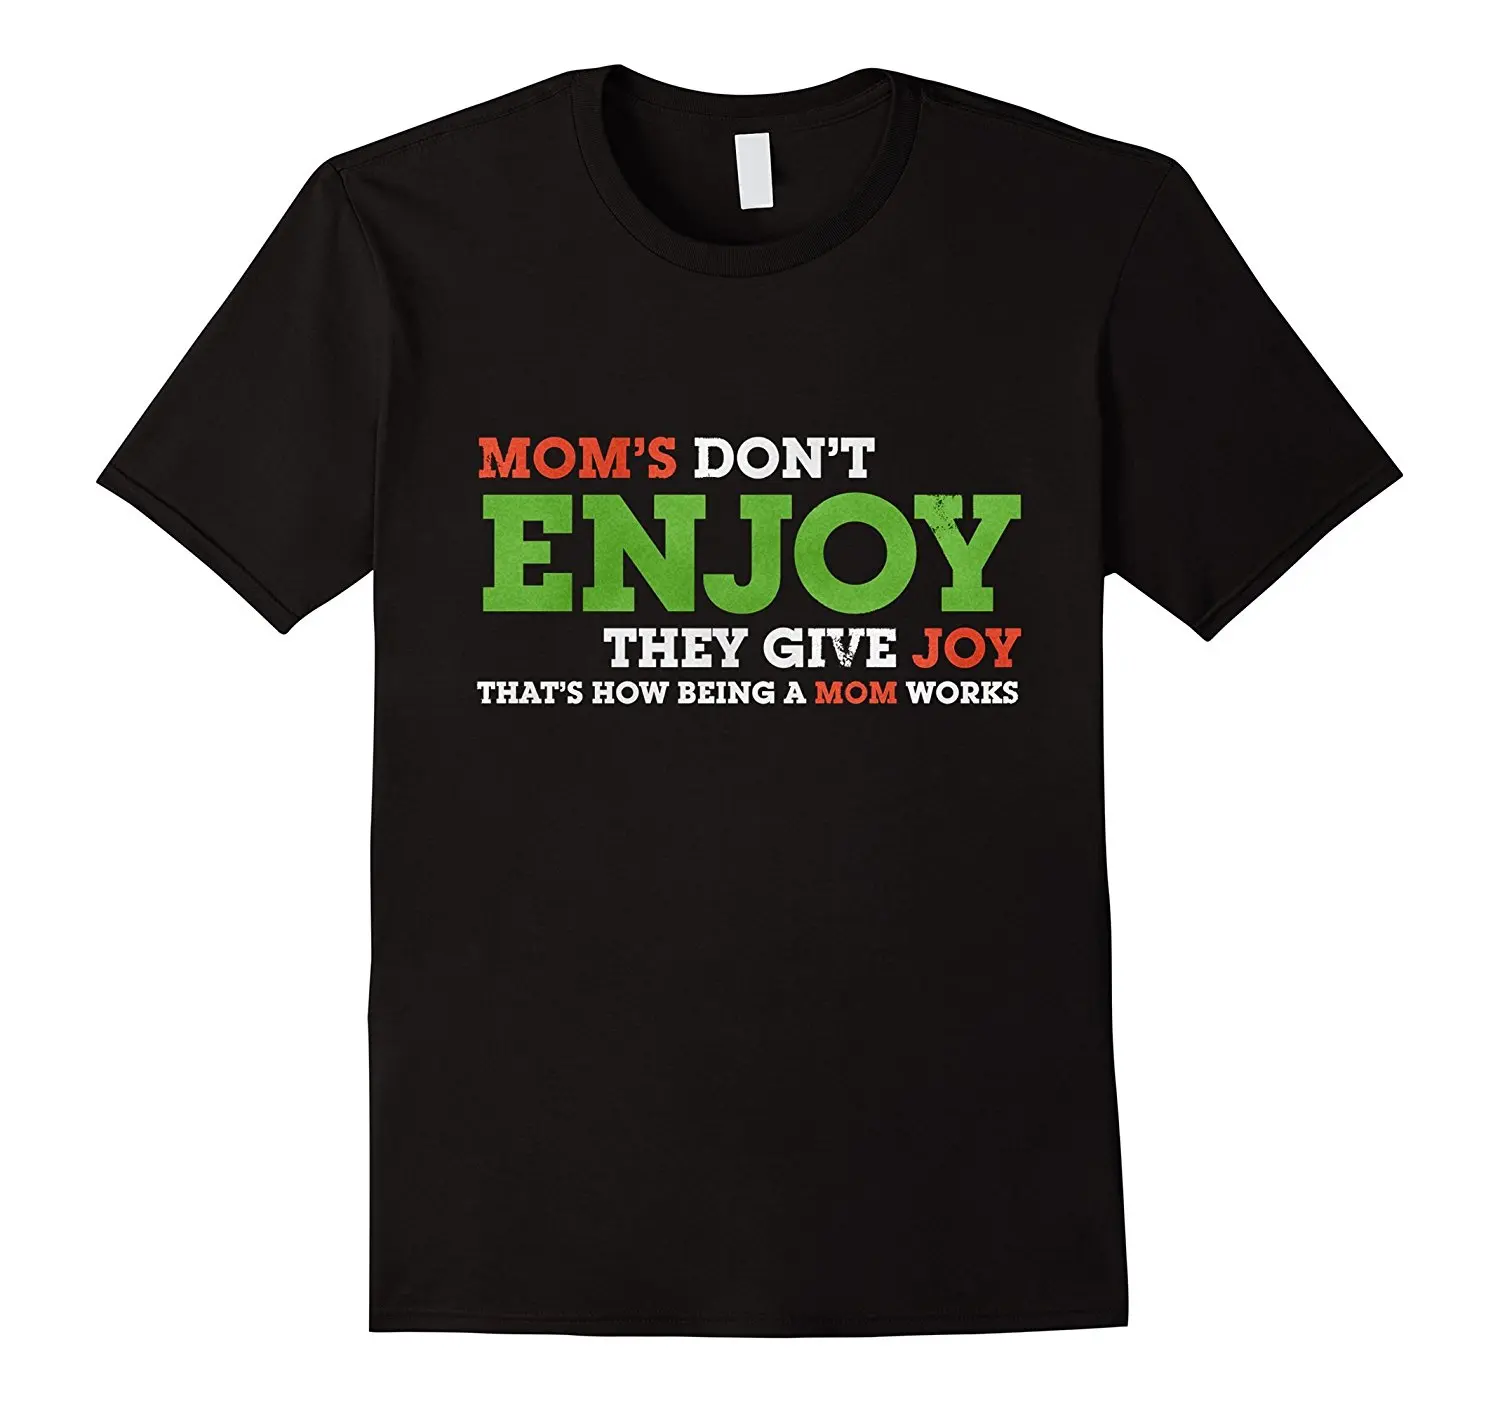 

Mom's Don't Enjoy, They Give Joy Bad Christmas T-shirt 2018 New Short Sleeve Casual T-Shirts Tee Colour Funny Printed